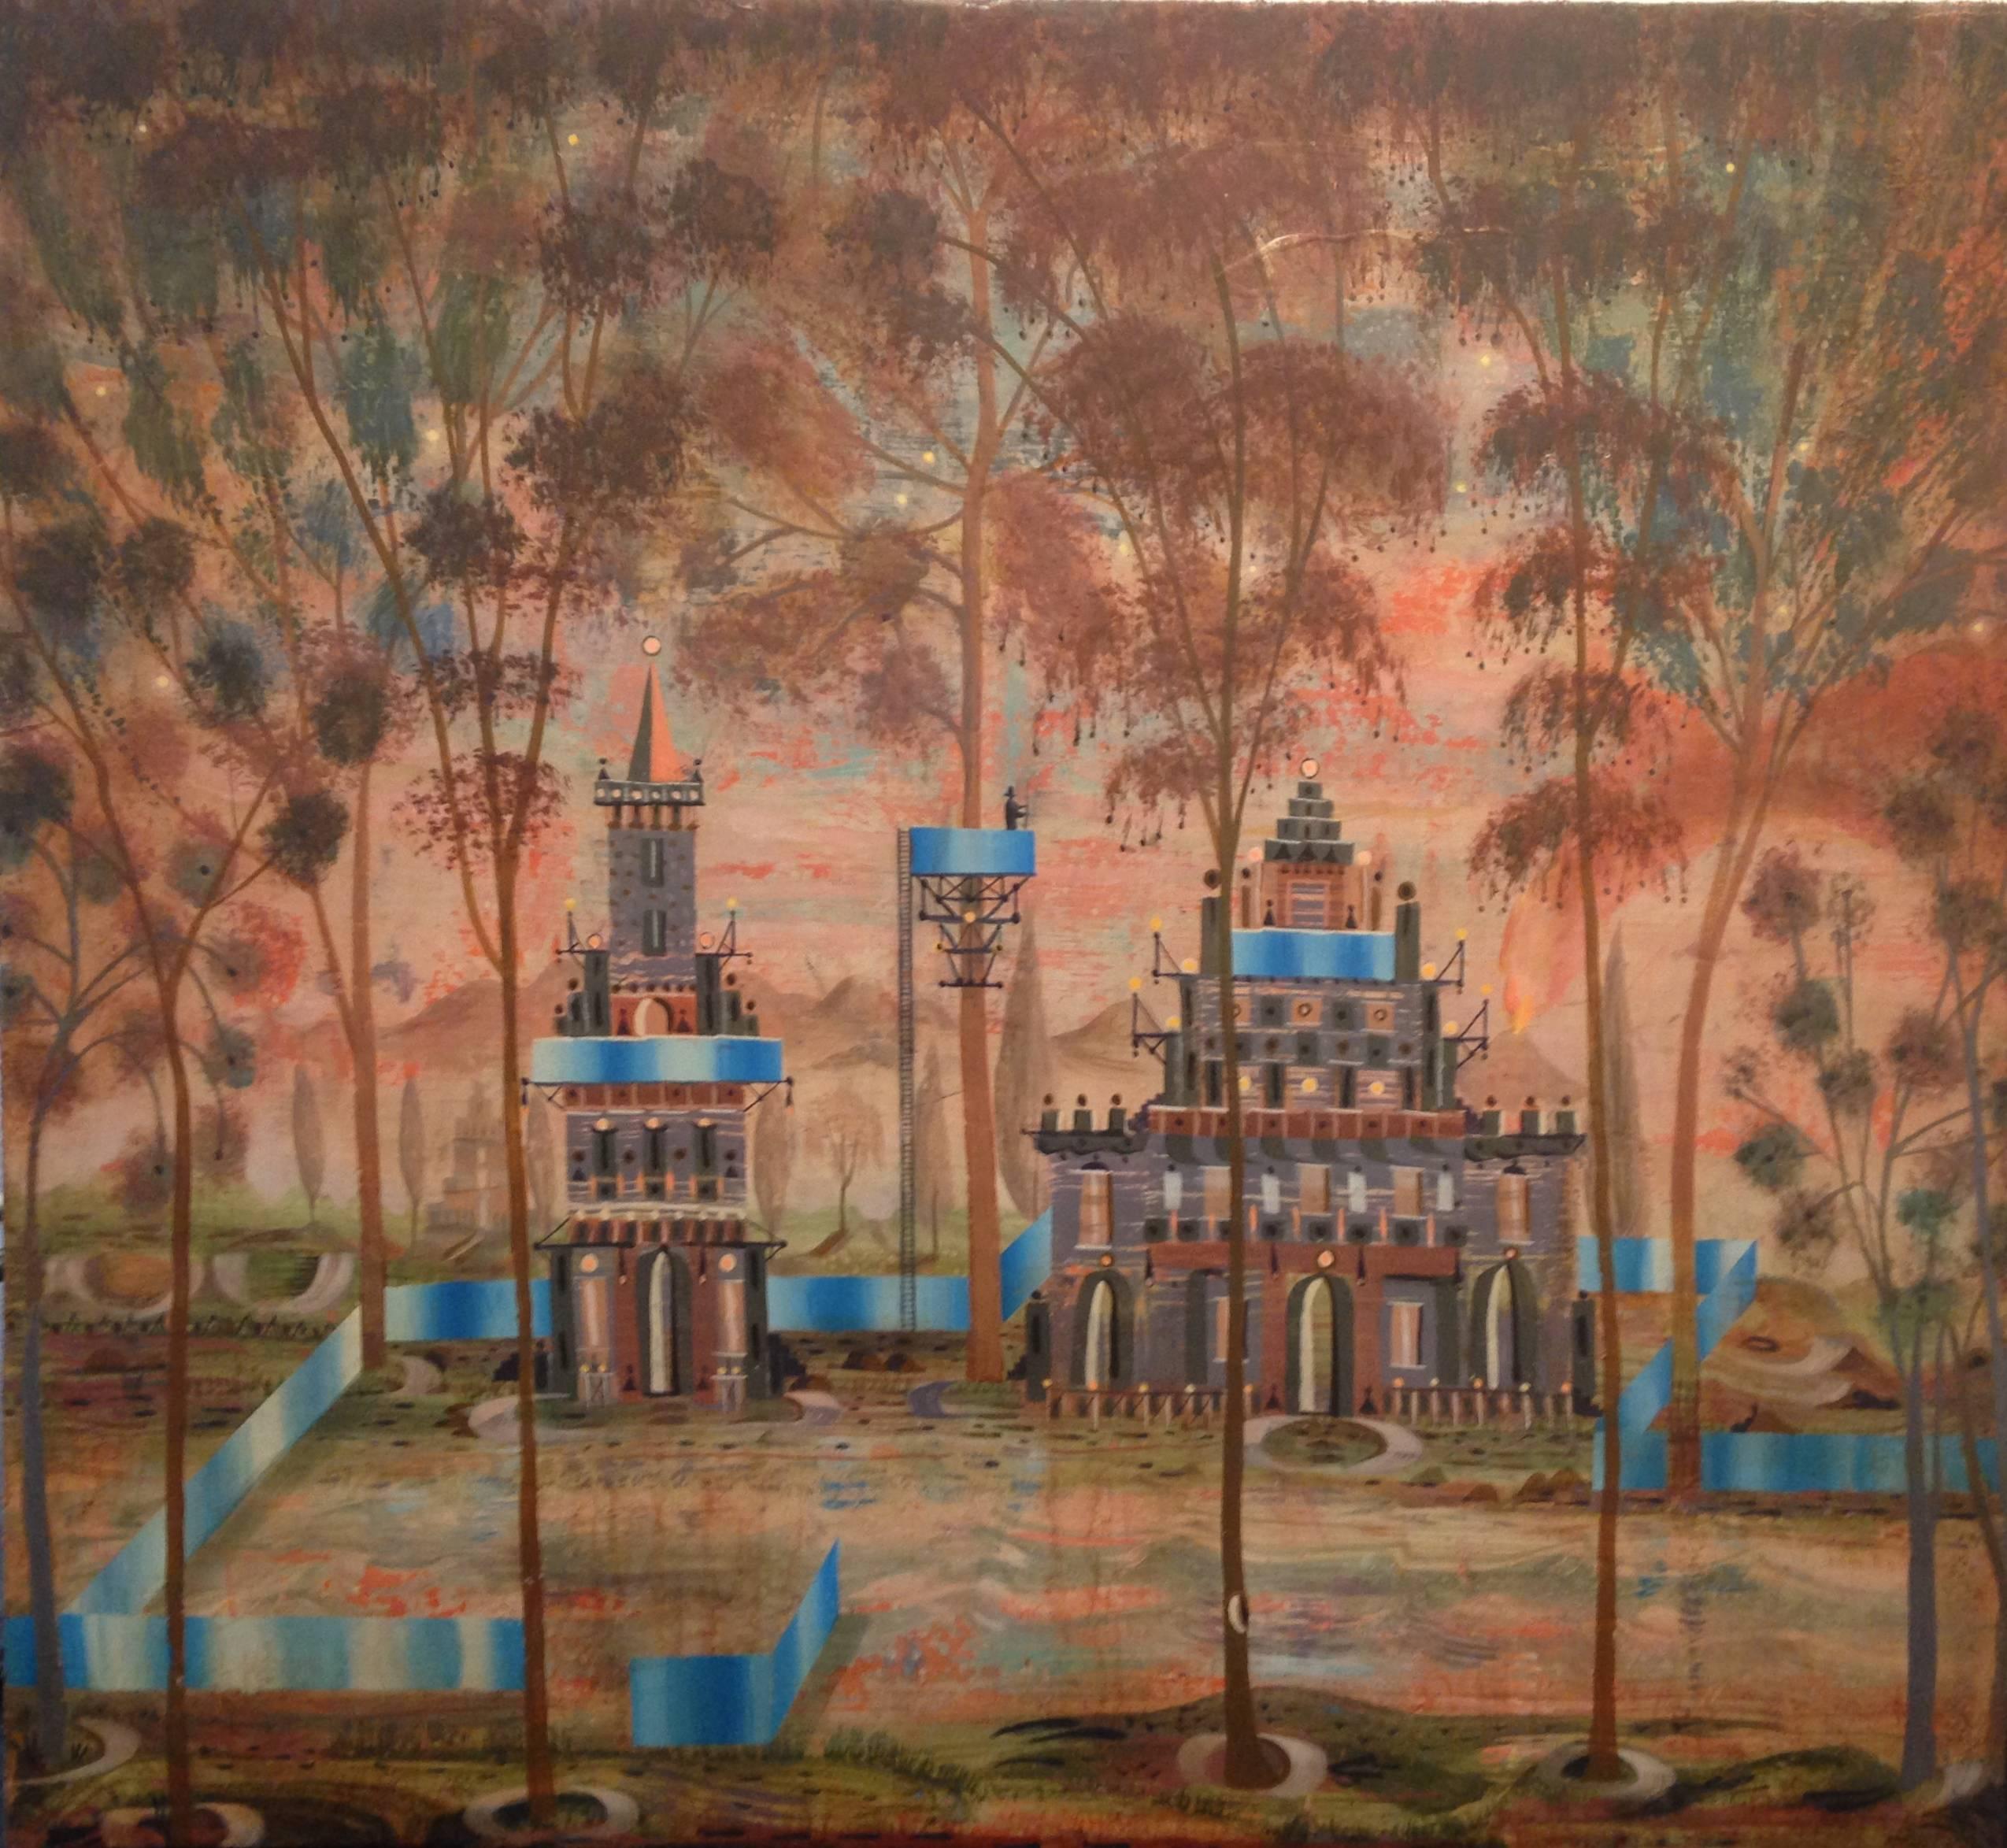 Kevin Paulsen Landscape Painting - Last Man Standing in the Last Bastion, Trees and City Landscape in Coral, Blue